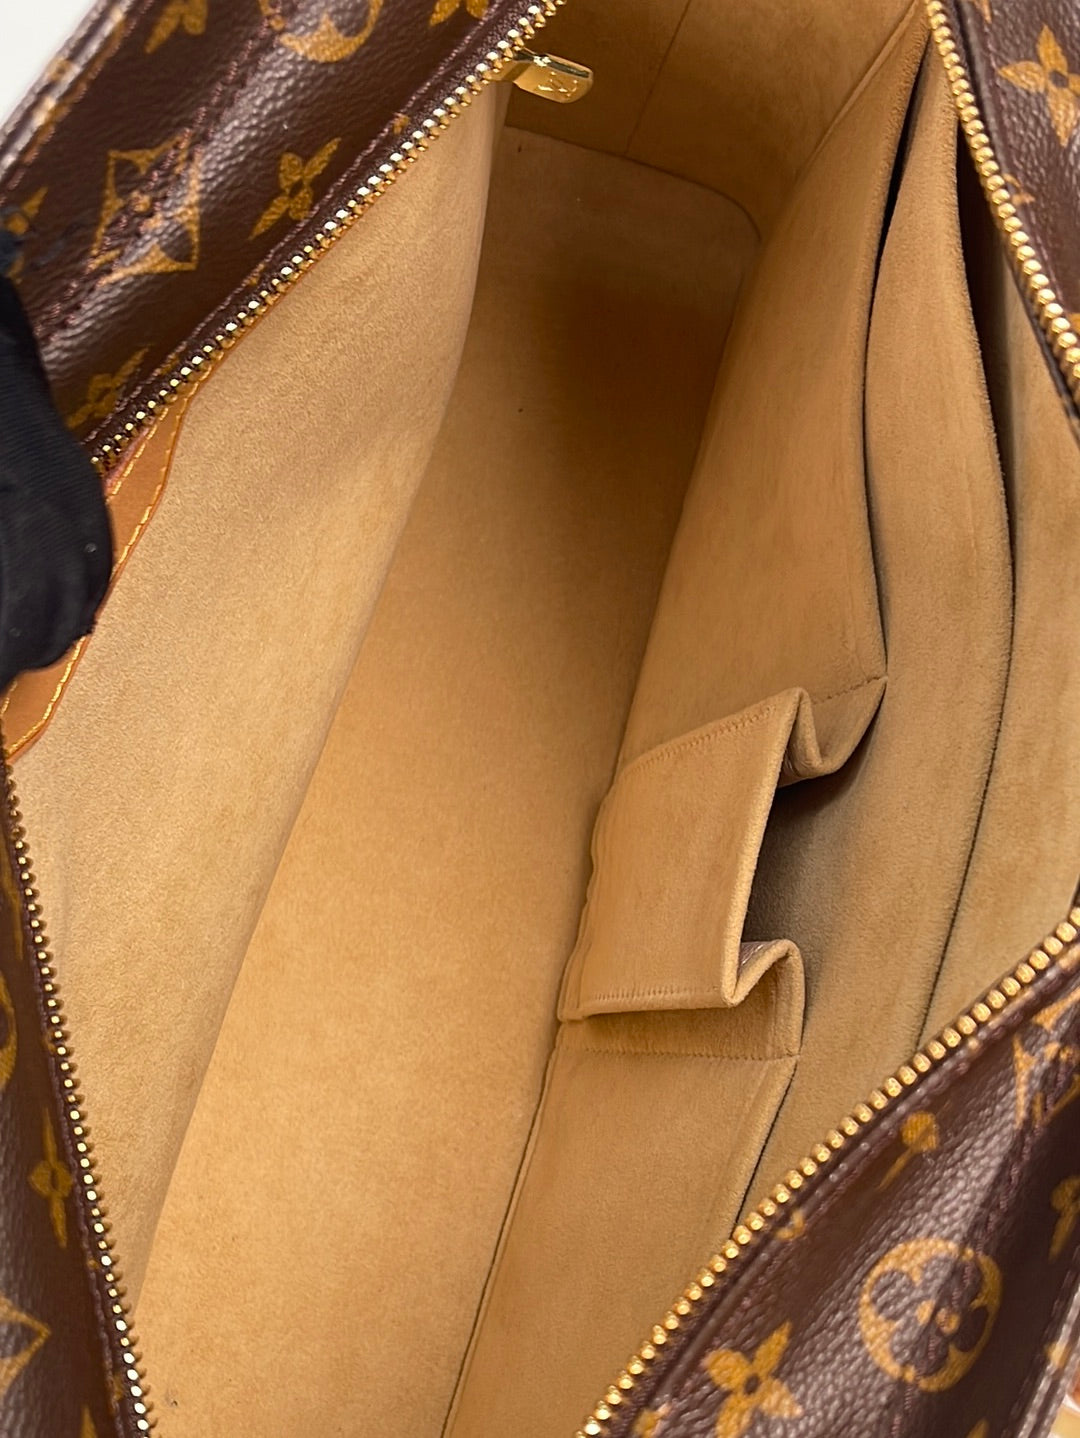 Retired Louis Vuitton Luco Tote - Review and What Fits Inside 